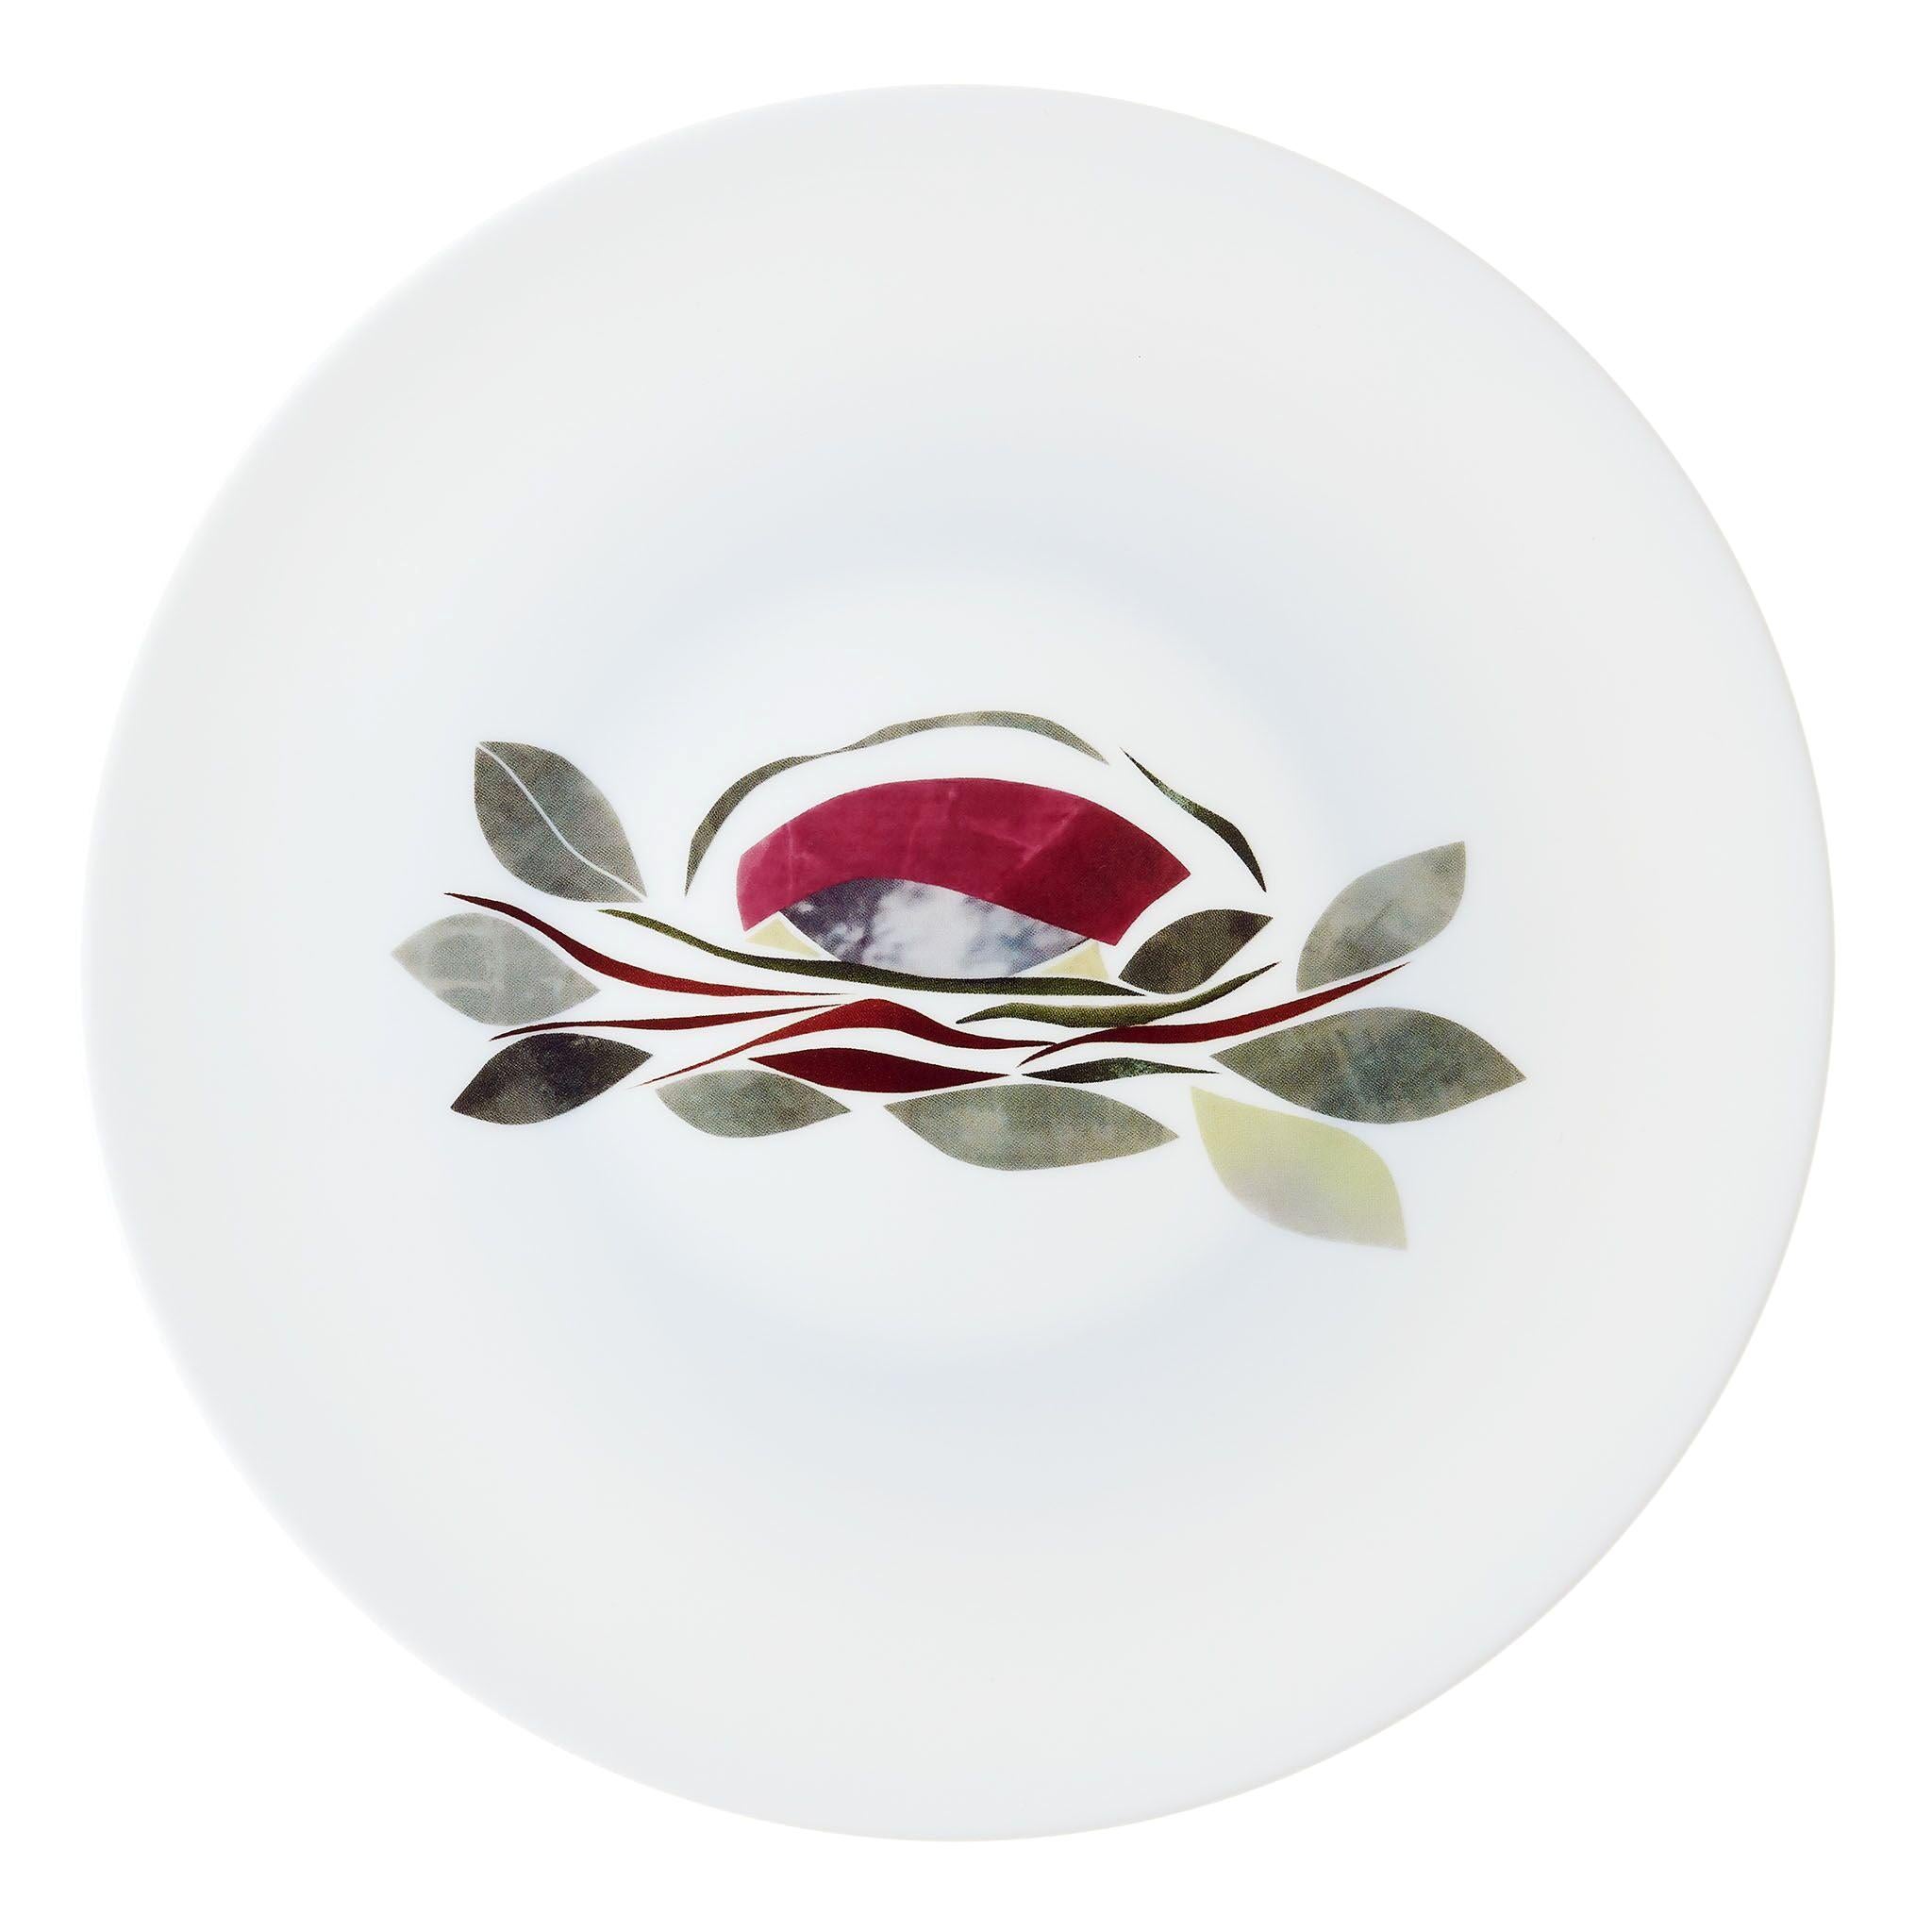 Dinner Porcelain Plate by the French Chef Alain Passard Model " Sushi"